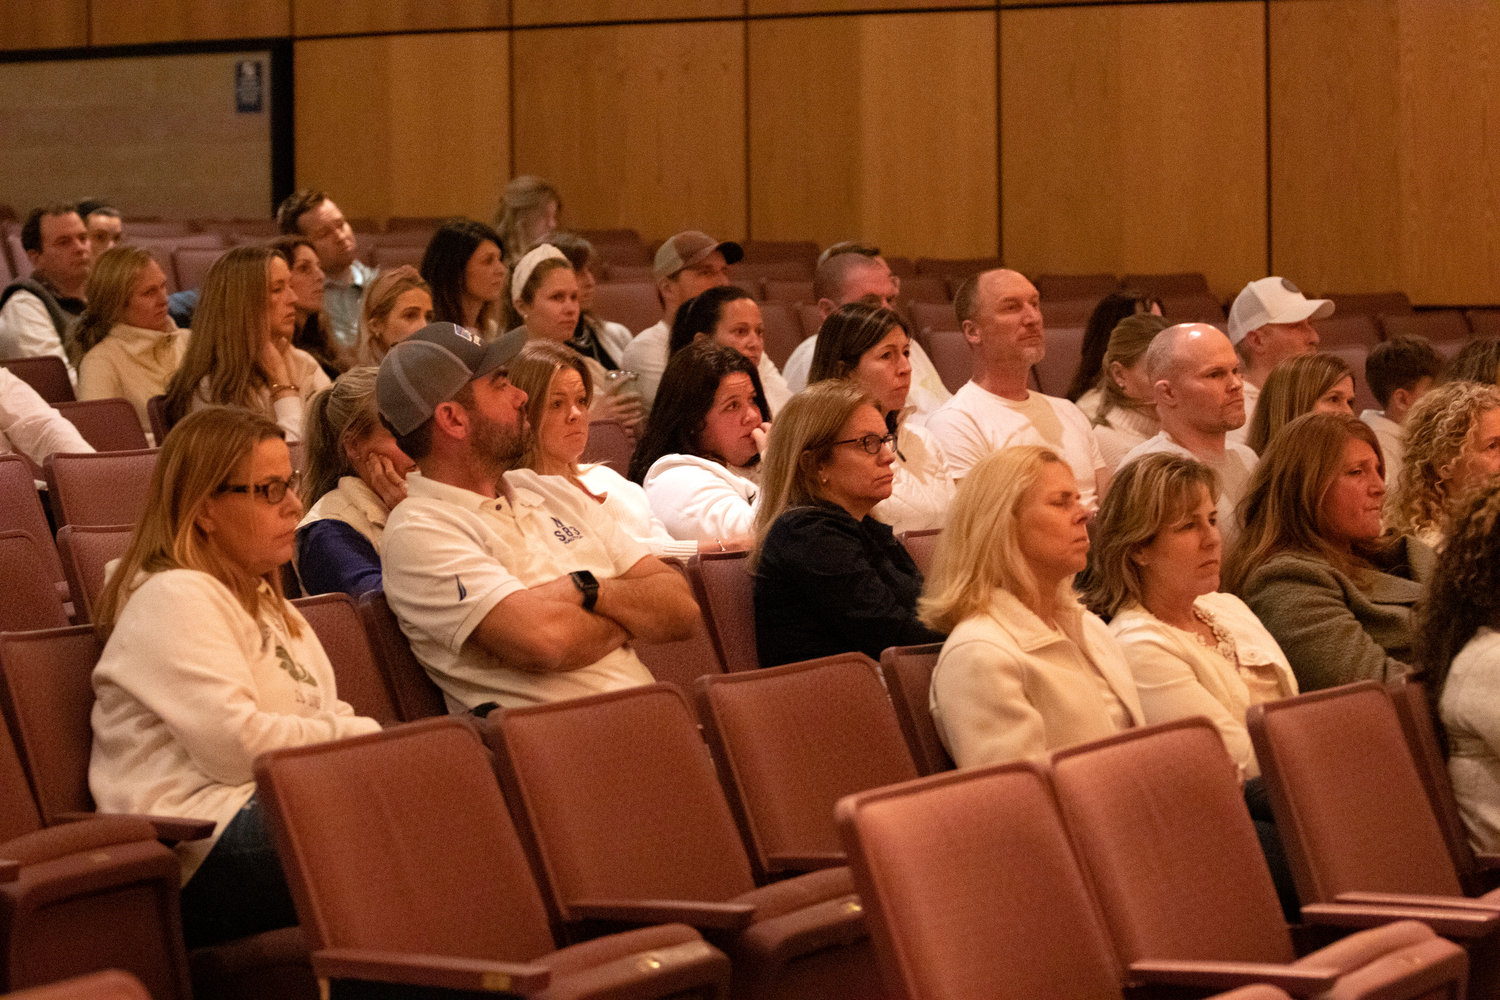 A crowd of people attend the appeal hearing for the fired Barrington teachers — many people in the audience wore white to show their support for the teachers.